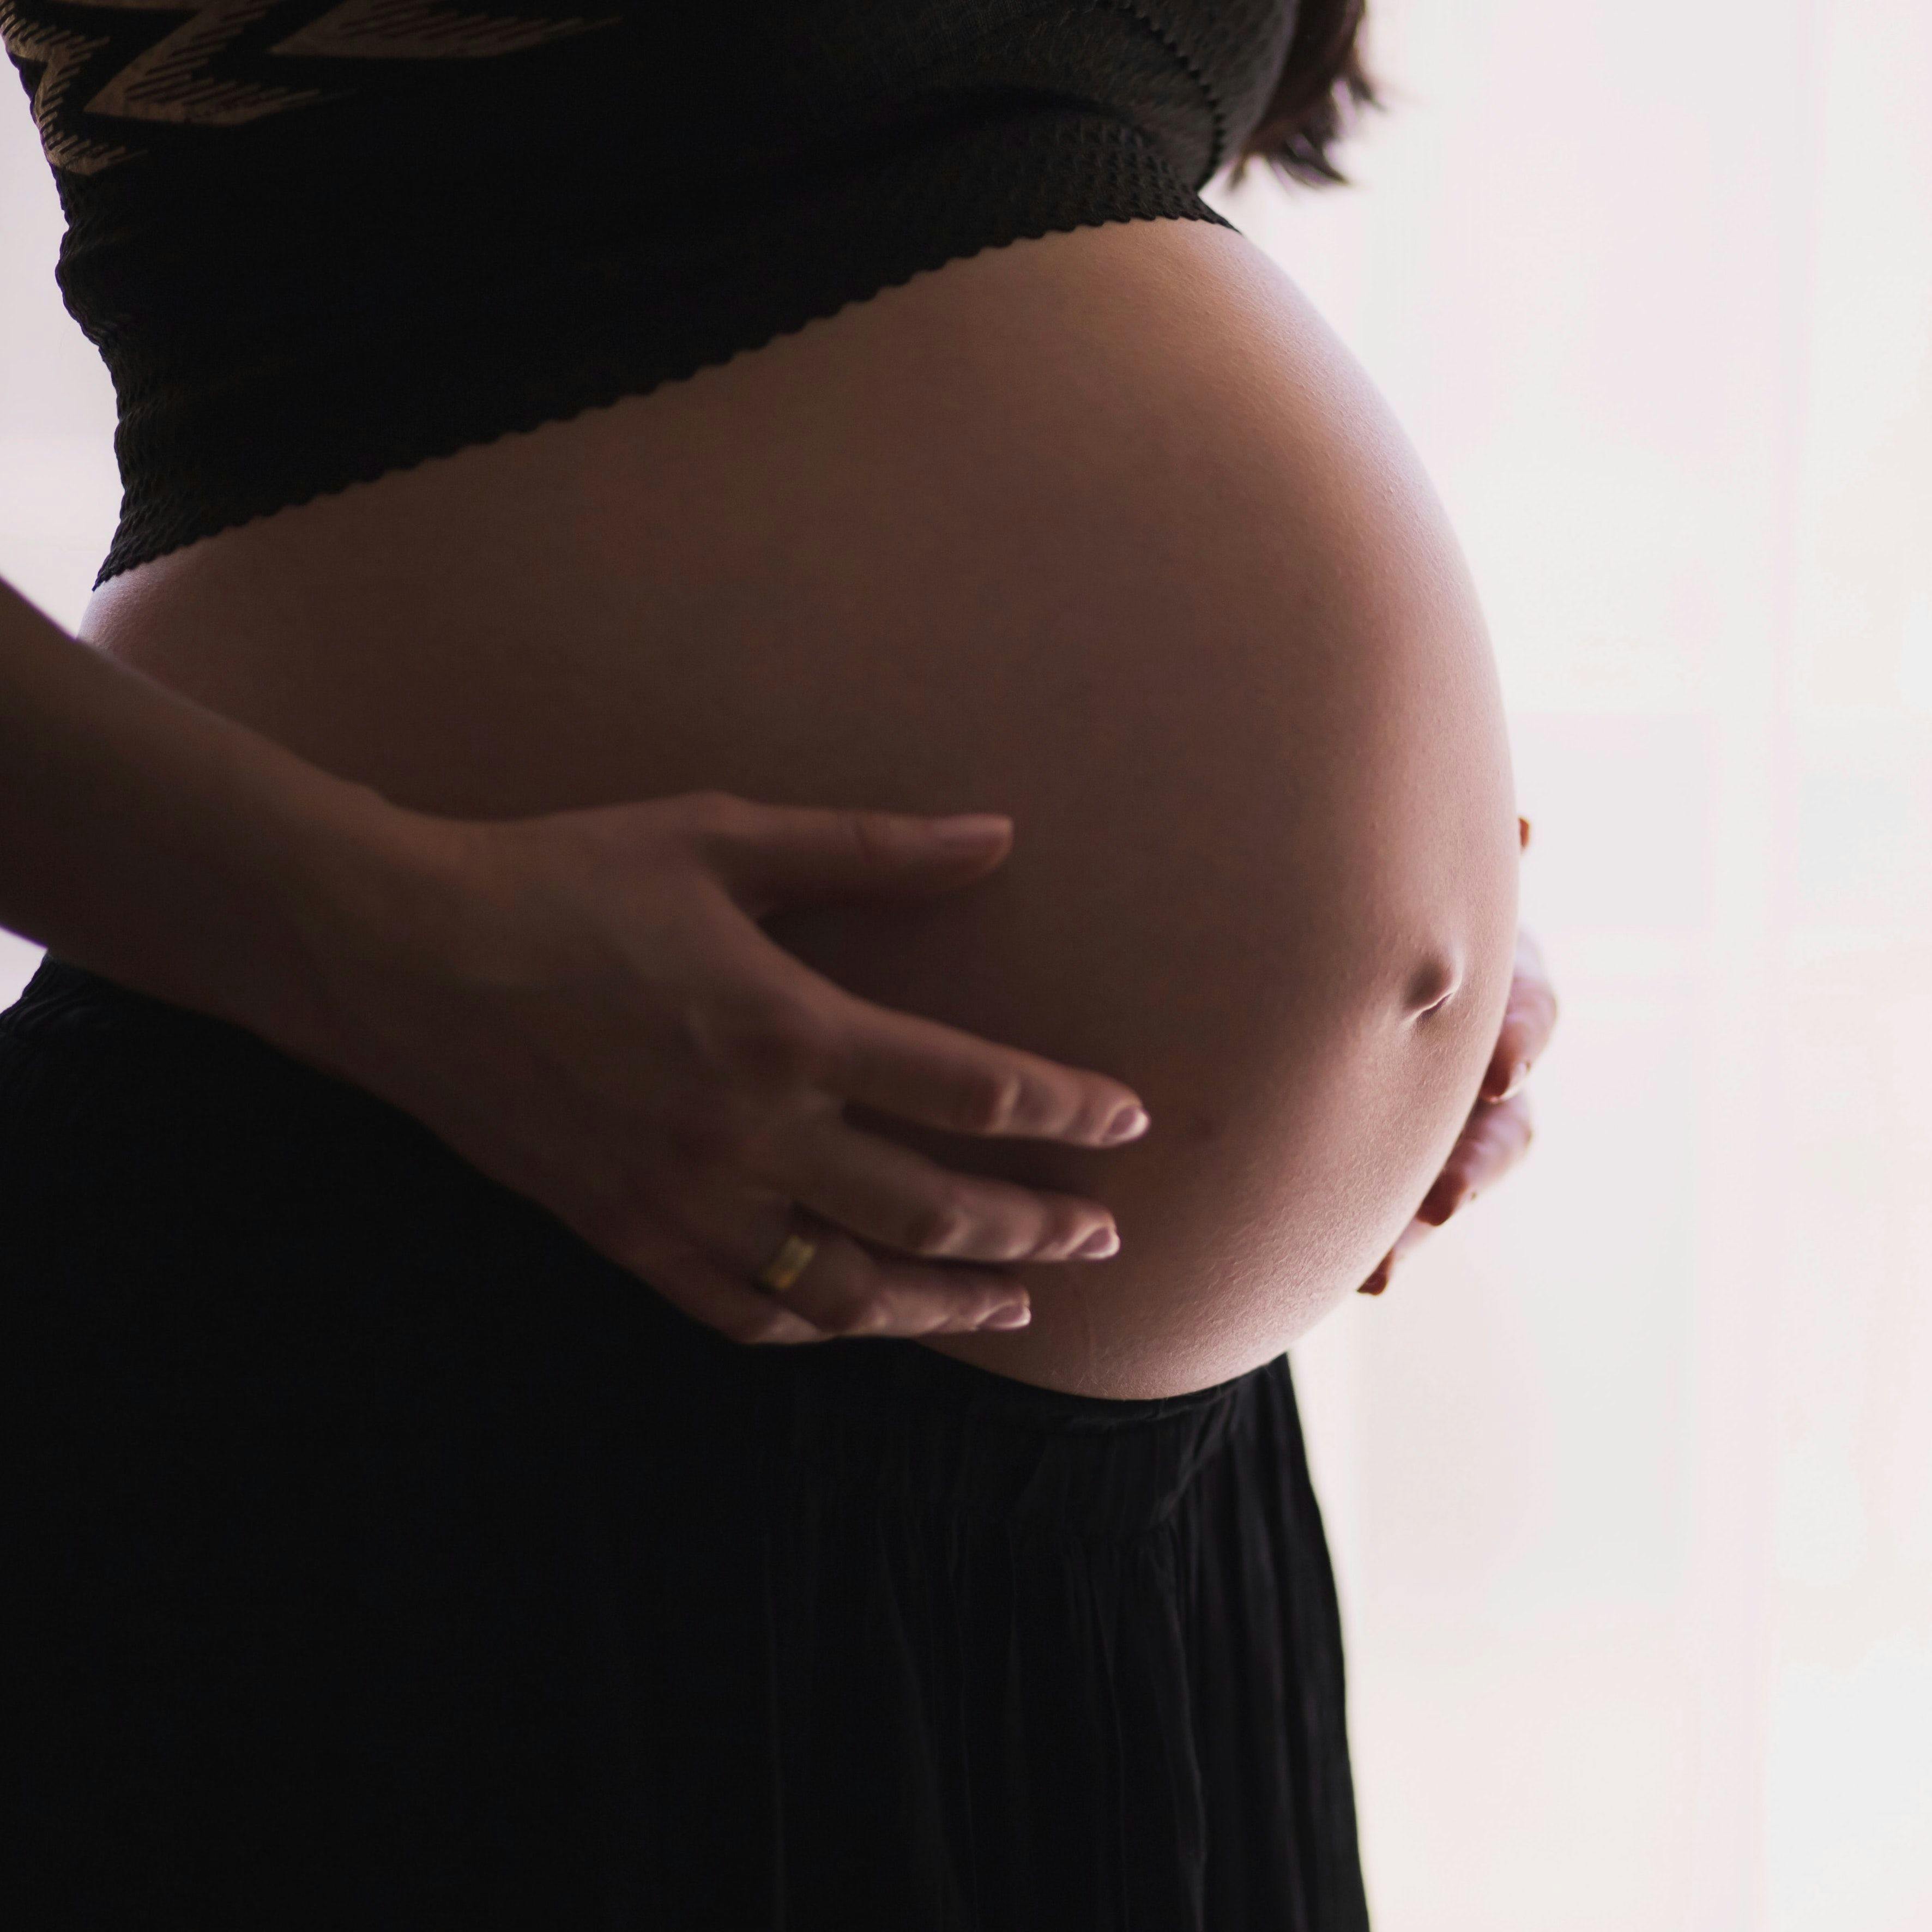 COVID-19 Vaccines Do Not Significantly Influence Pregnancy Outcomes, Preliminary Study Shows